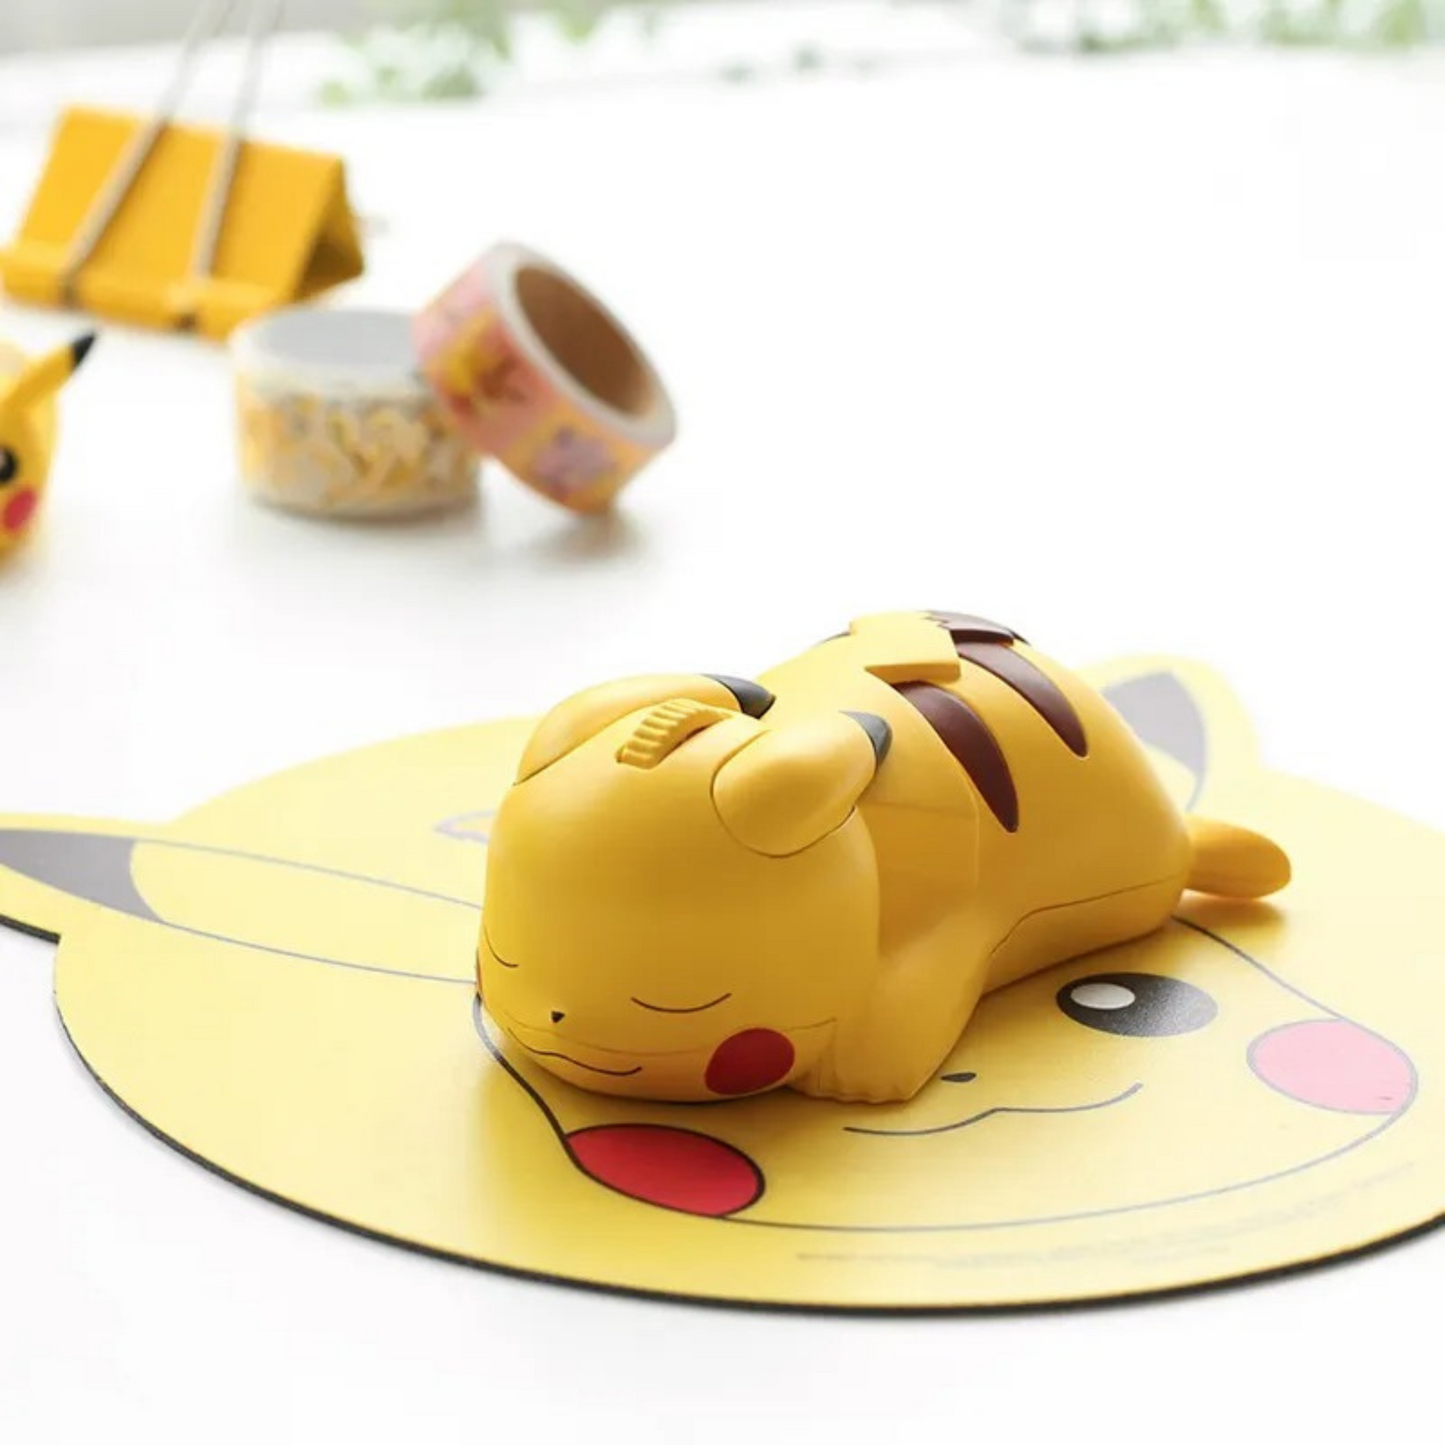 Sleeping Pikachu - Pikachu Pokémon mouse wireless bluetooth connection with official premium nintendo quality, perfect gift for pokemon fans